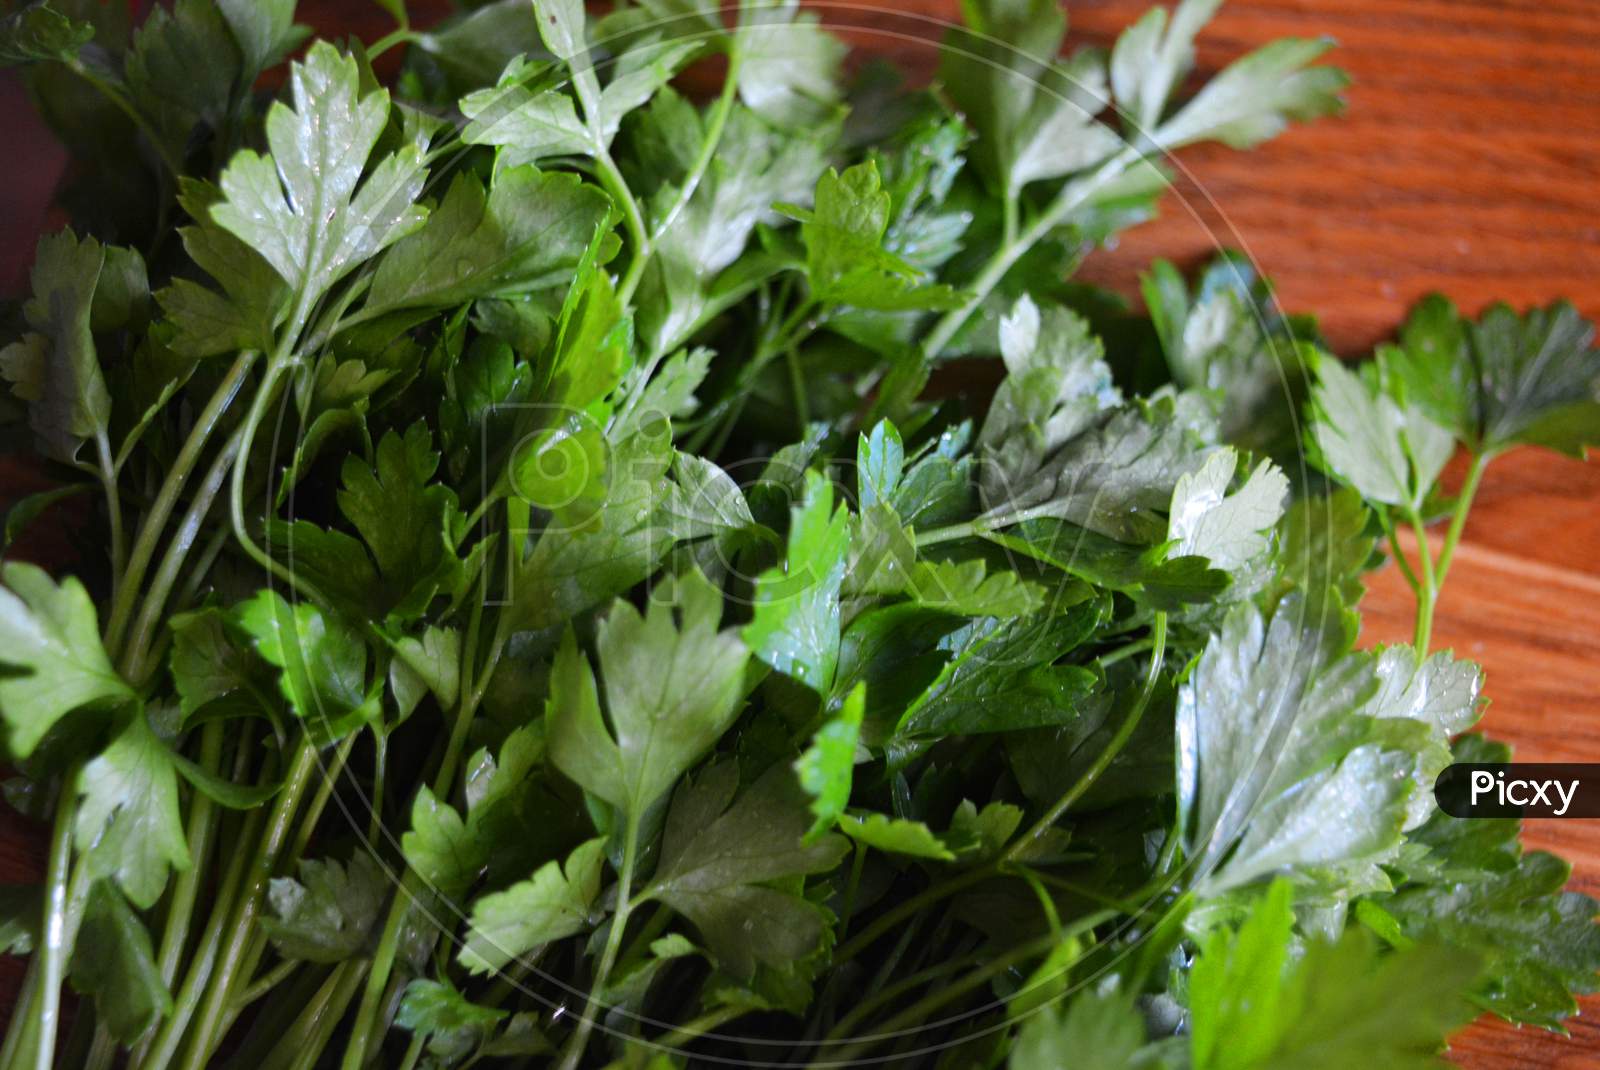 Bunches of green washed fresh parsley laid out on a wooden kitchen board.